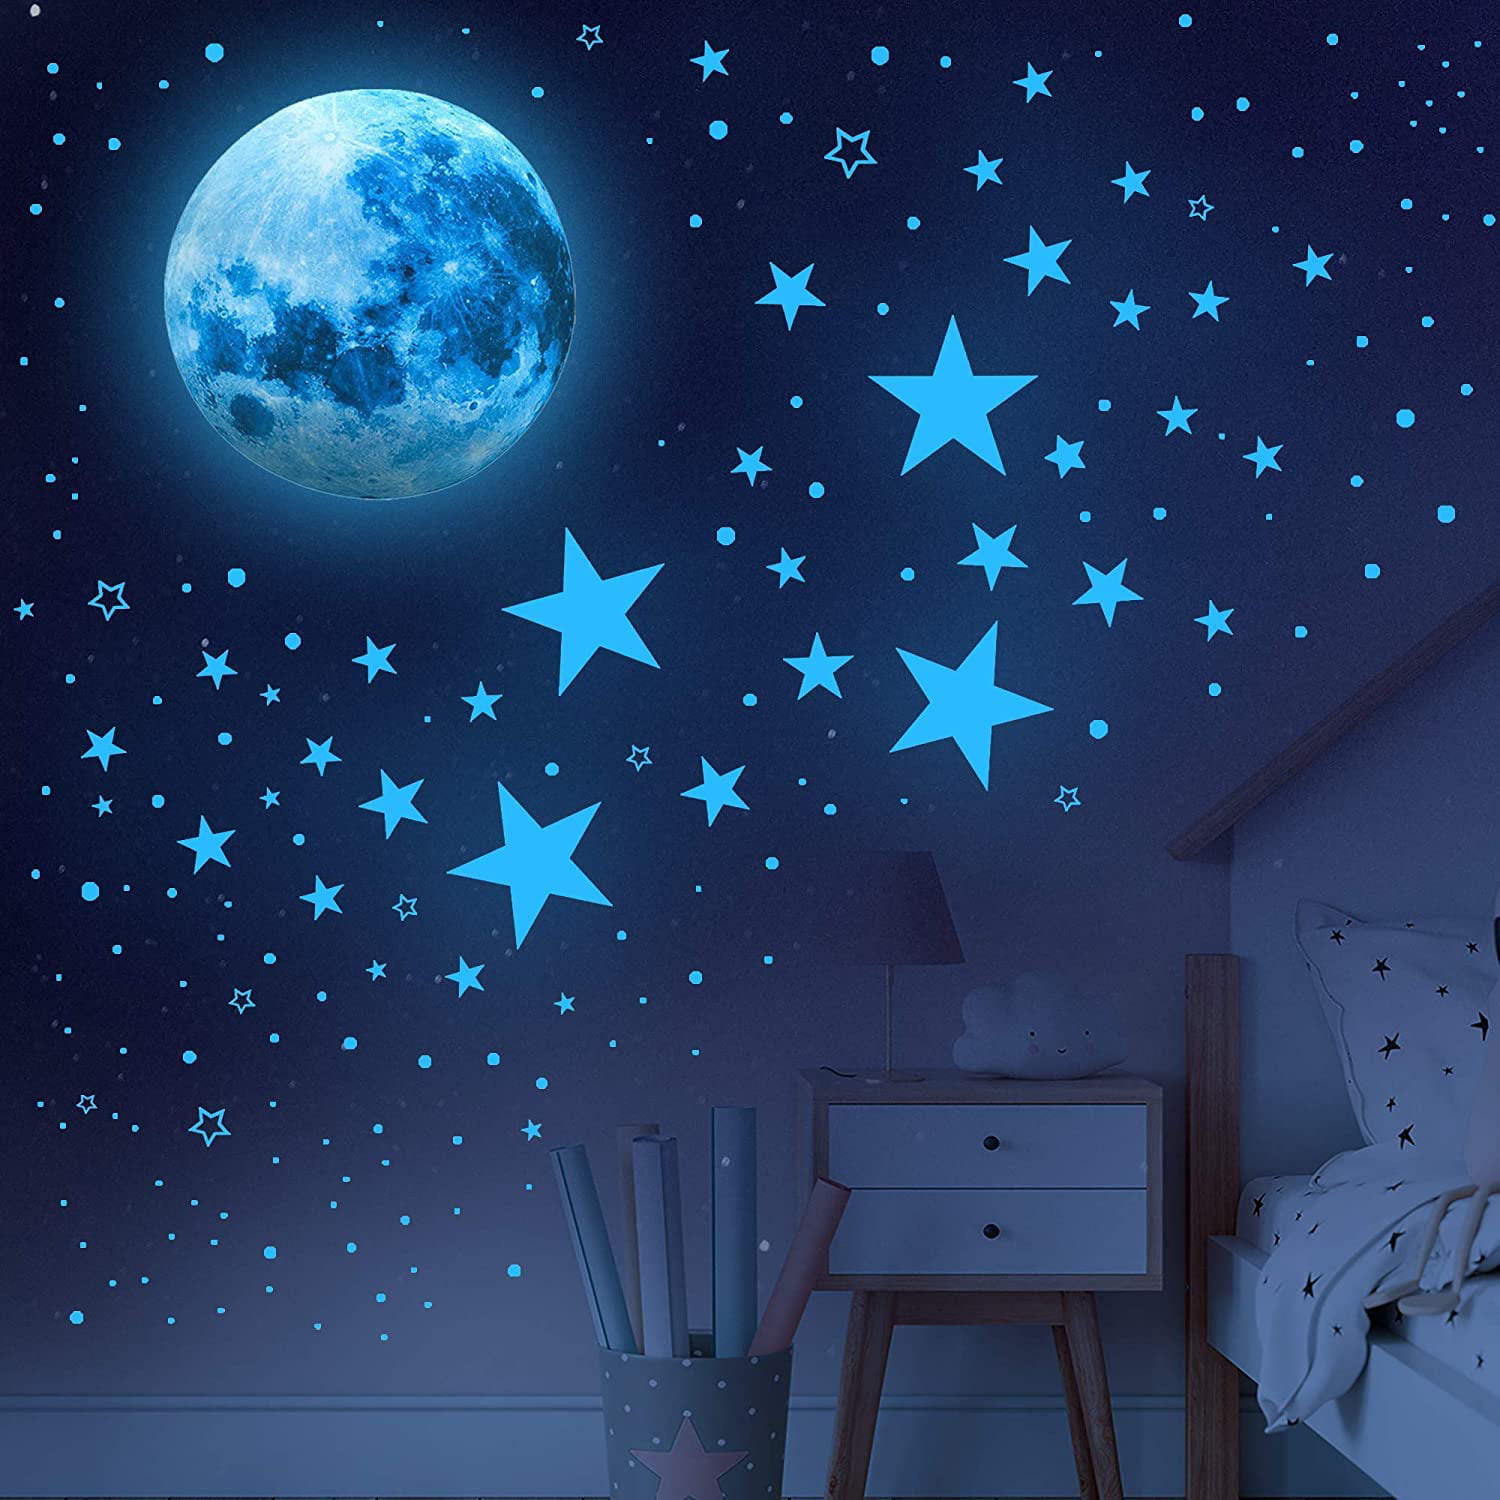 Stars Glowing Ceiling Decals with The Moon and dots for Kids Bedroom Any Room Shining Space Decoration LUISTUL 1622 Pcs Glow in The Dark Stars Wall Stickers Unicorns Fairies 